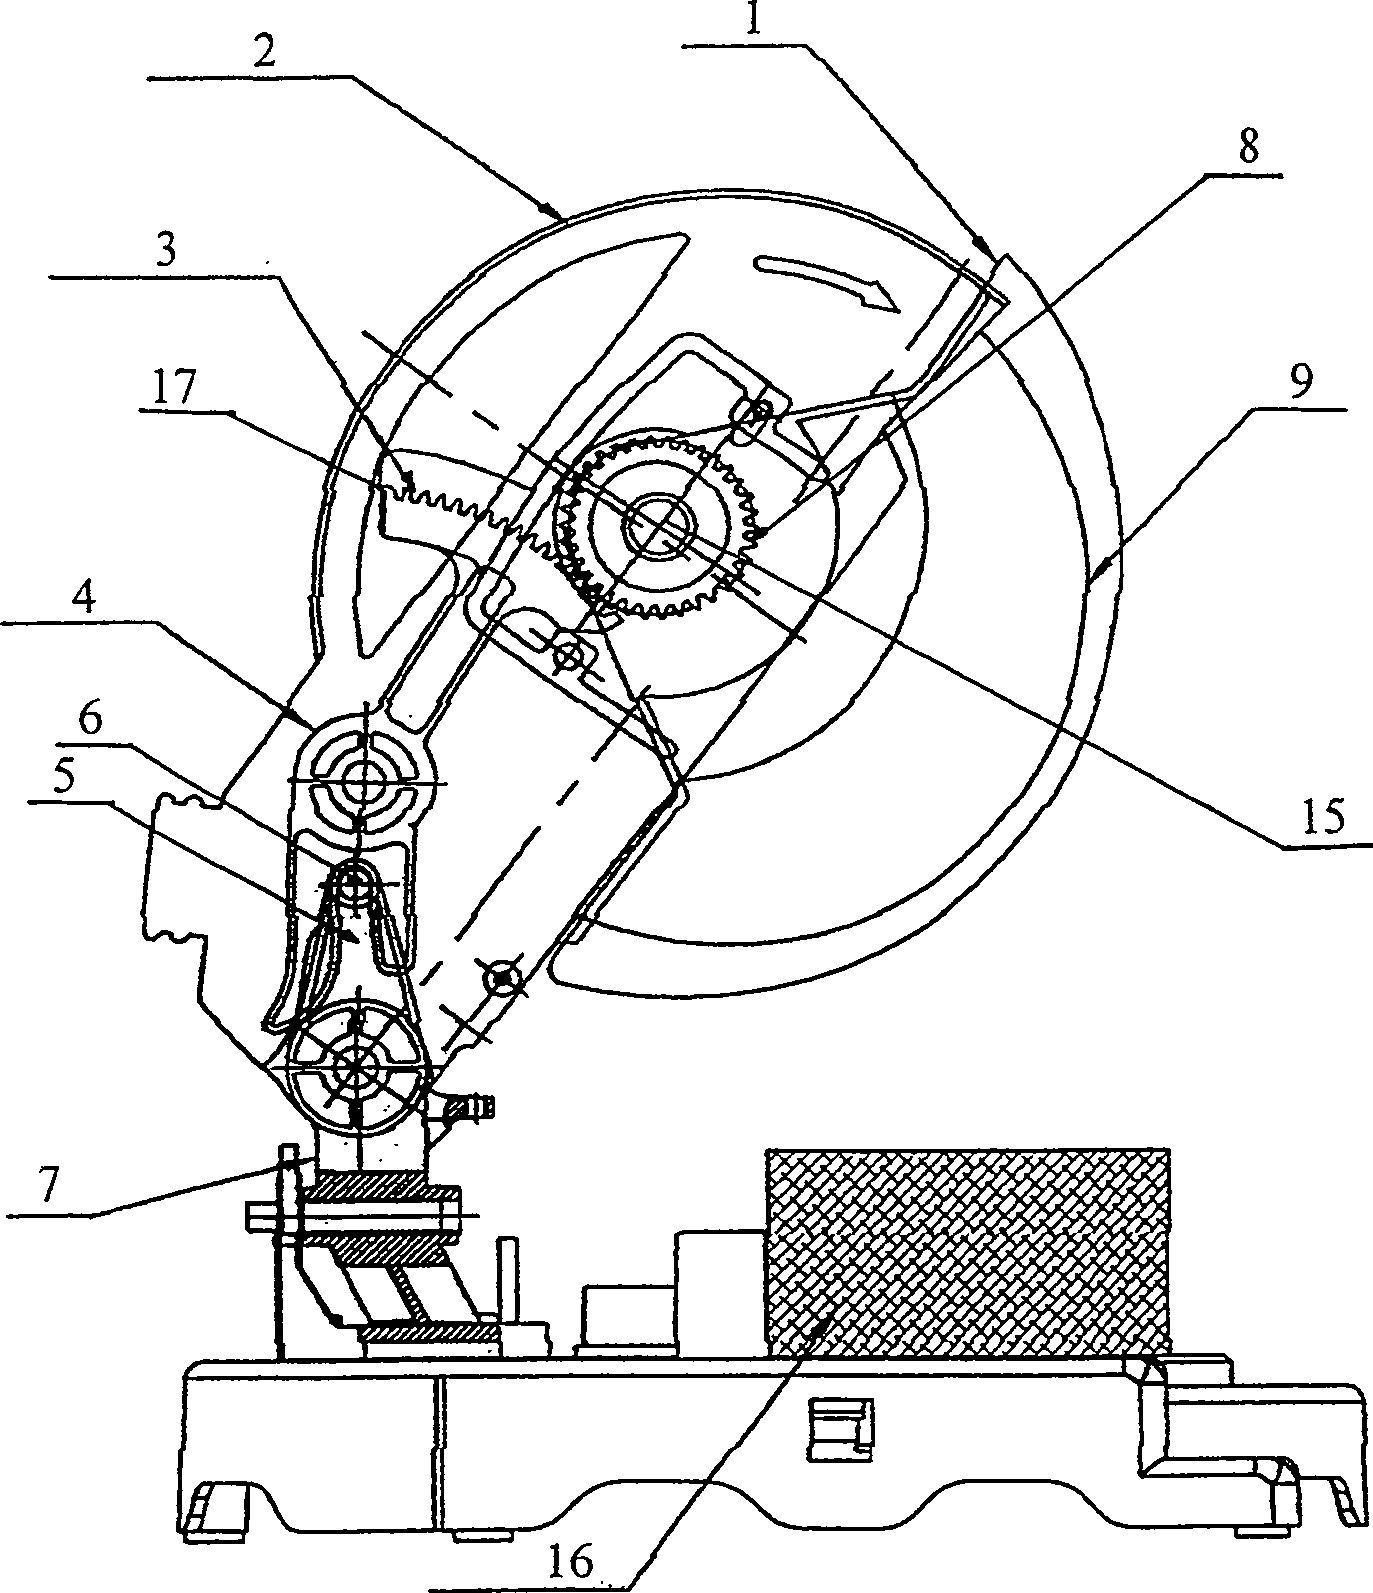 Flexible protective cover apparatus of cutter